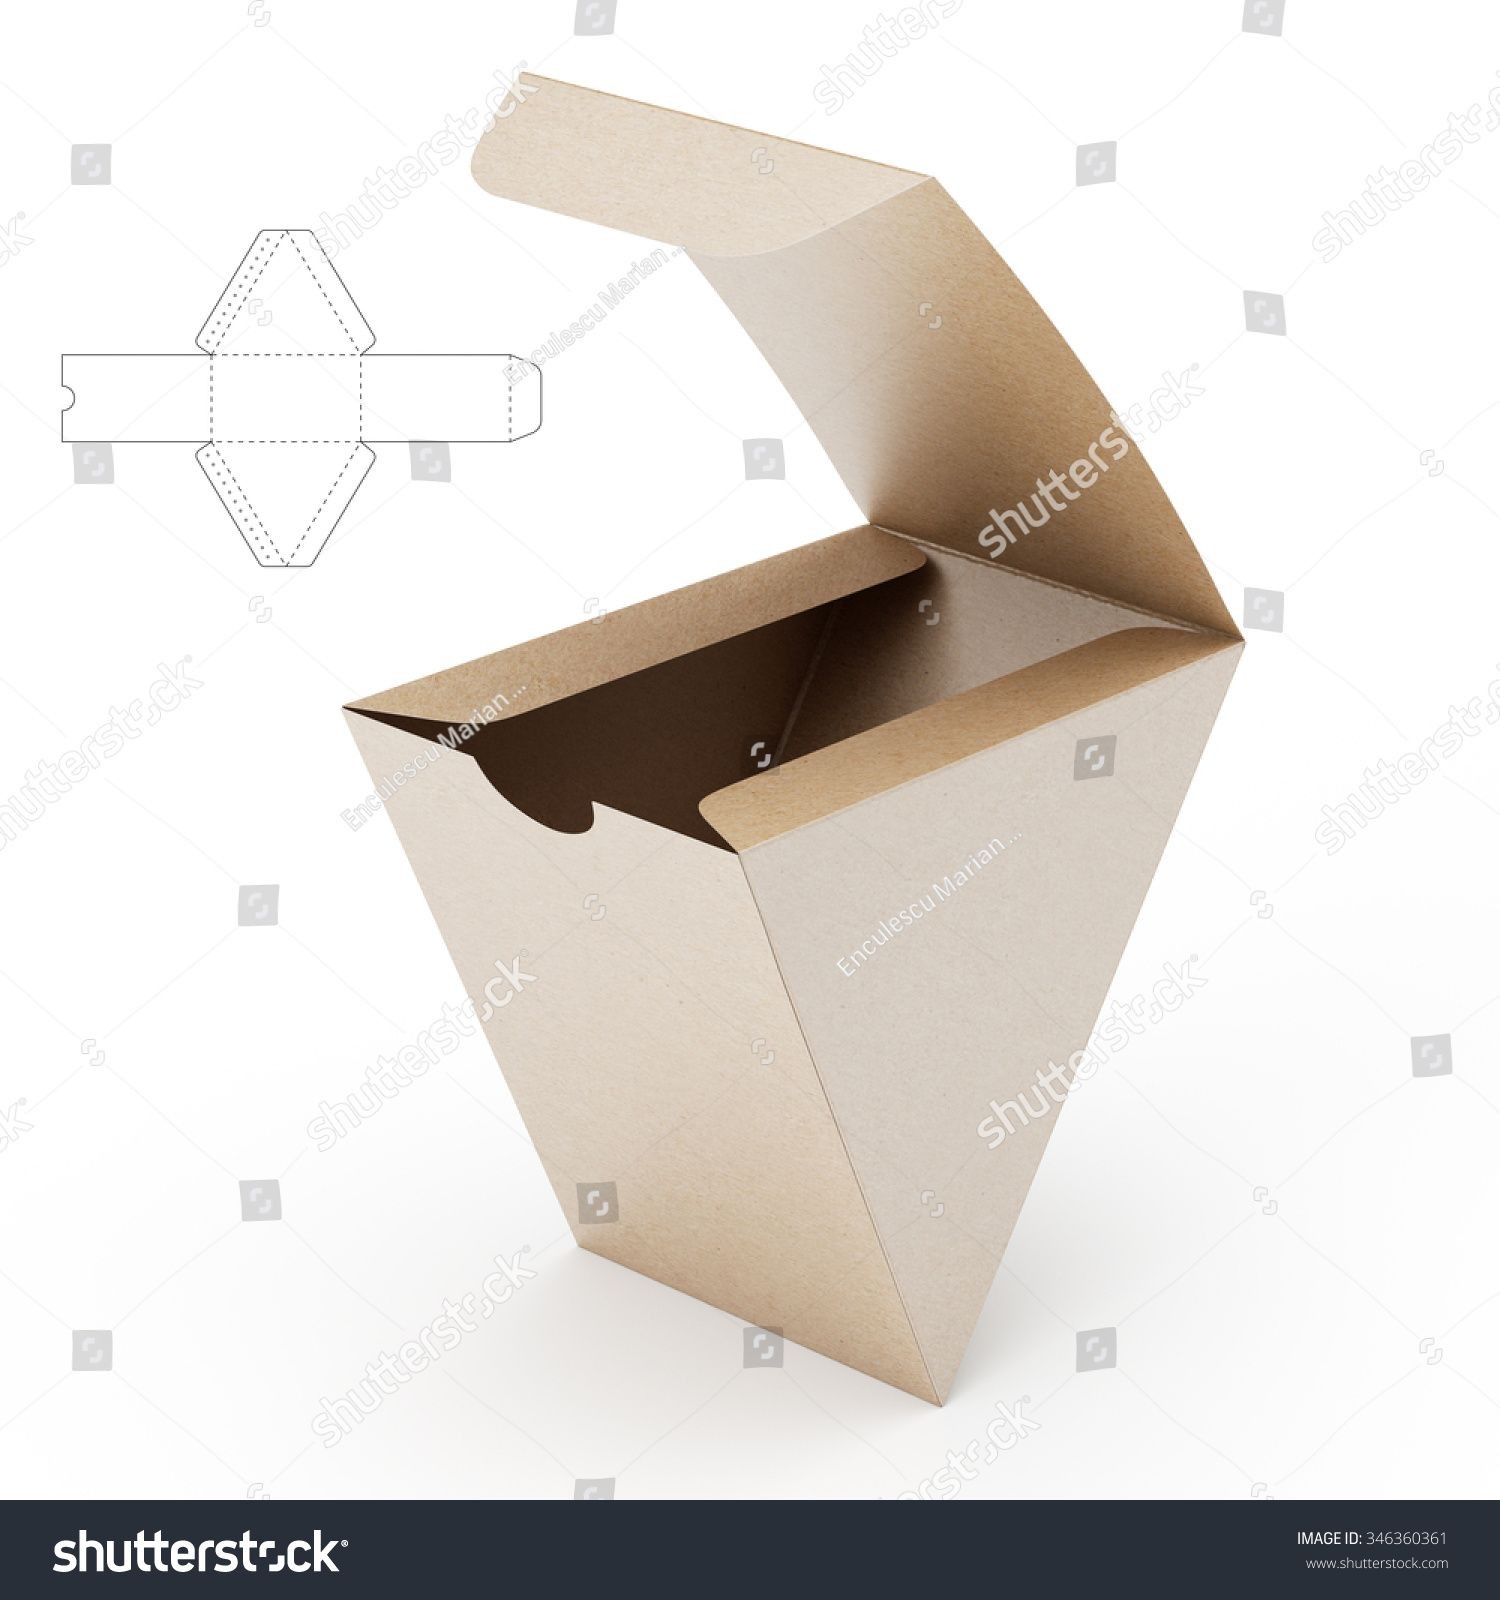 Papercraft Box Triangular Box with Die Cut Template Packaging